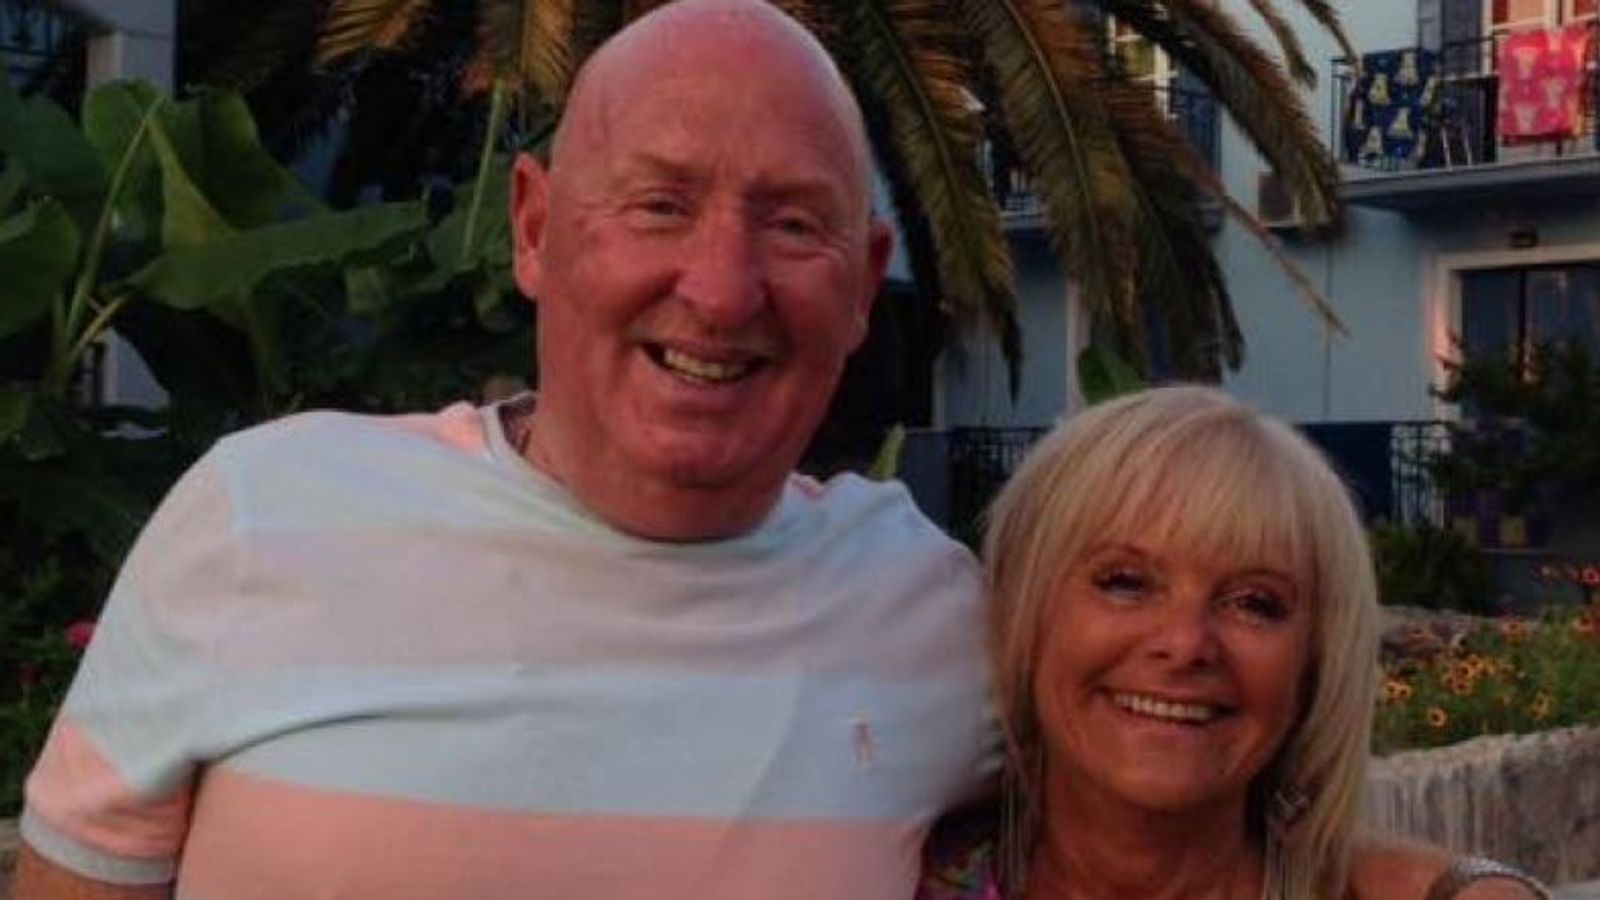 Egypt hotel room next door to British couple fumigated day before their deaths - inquest